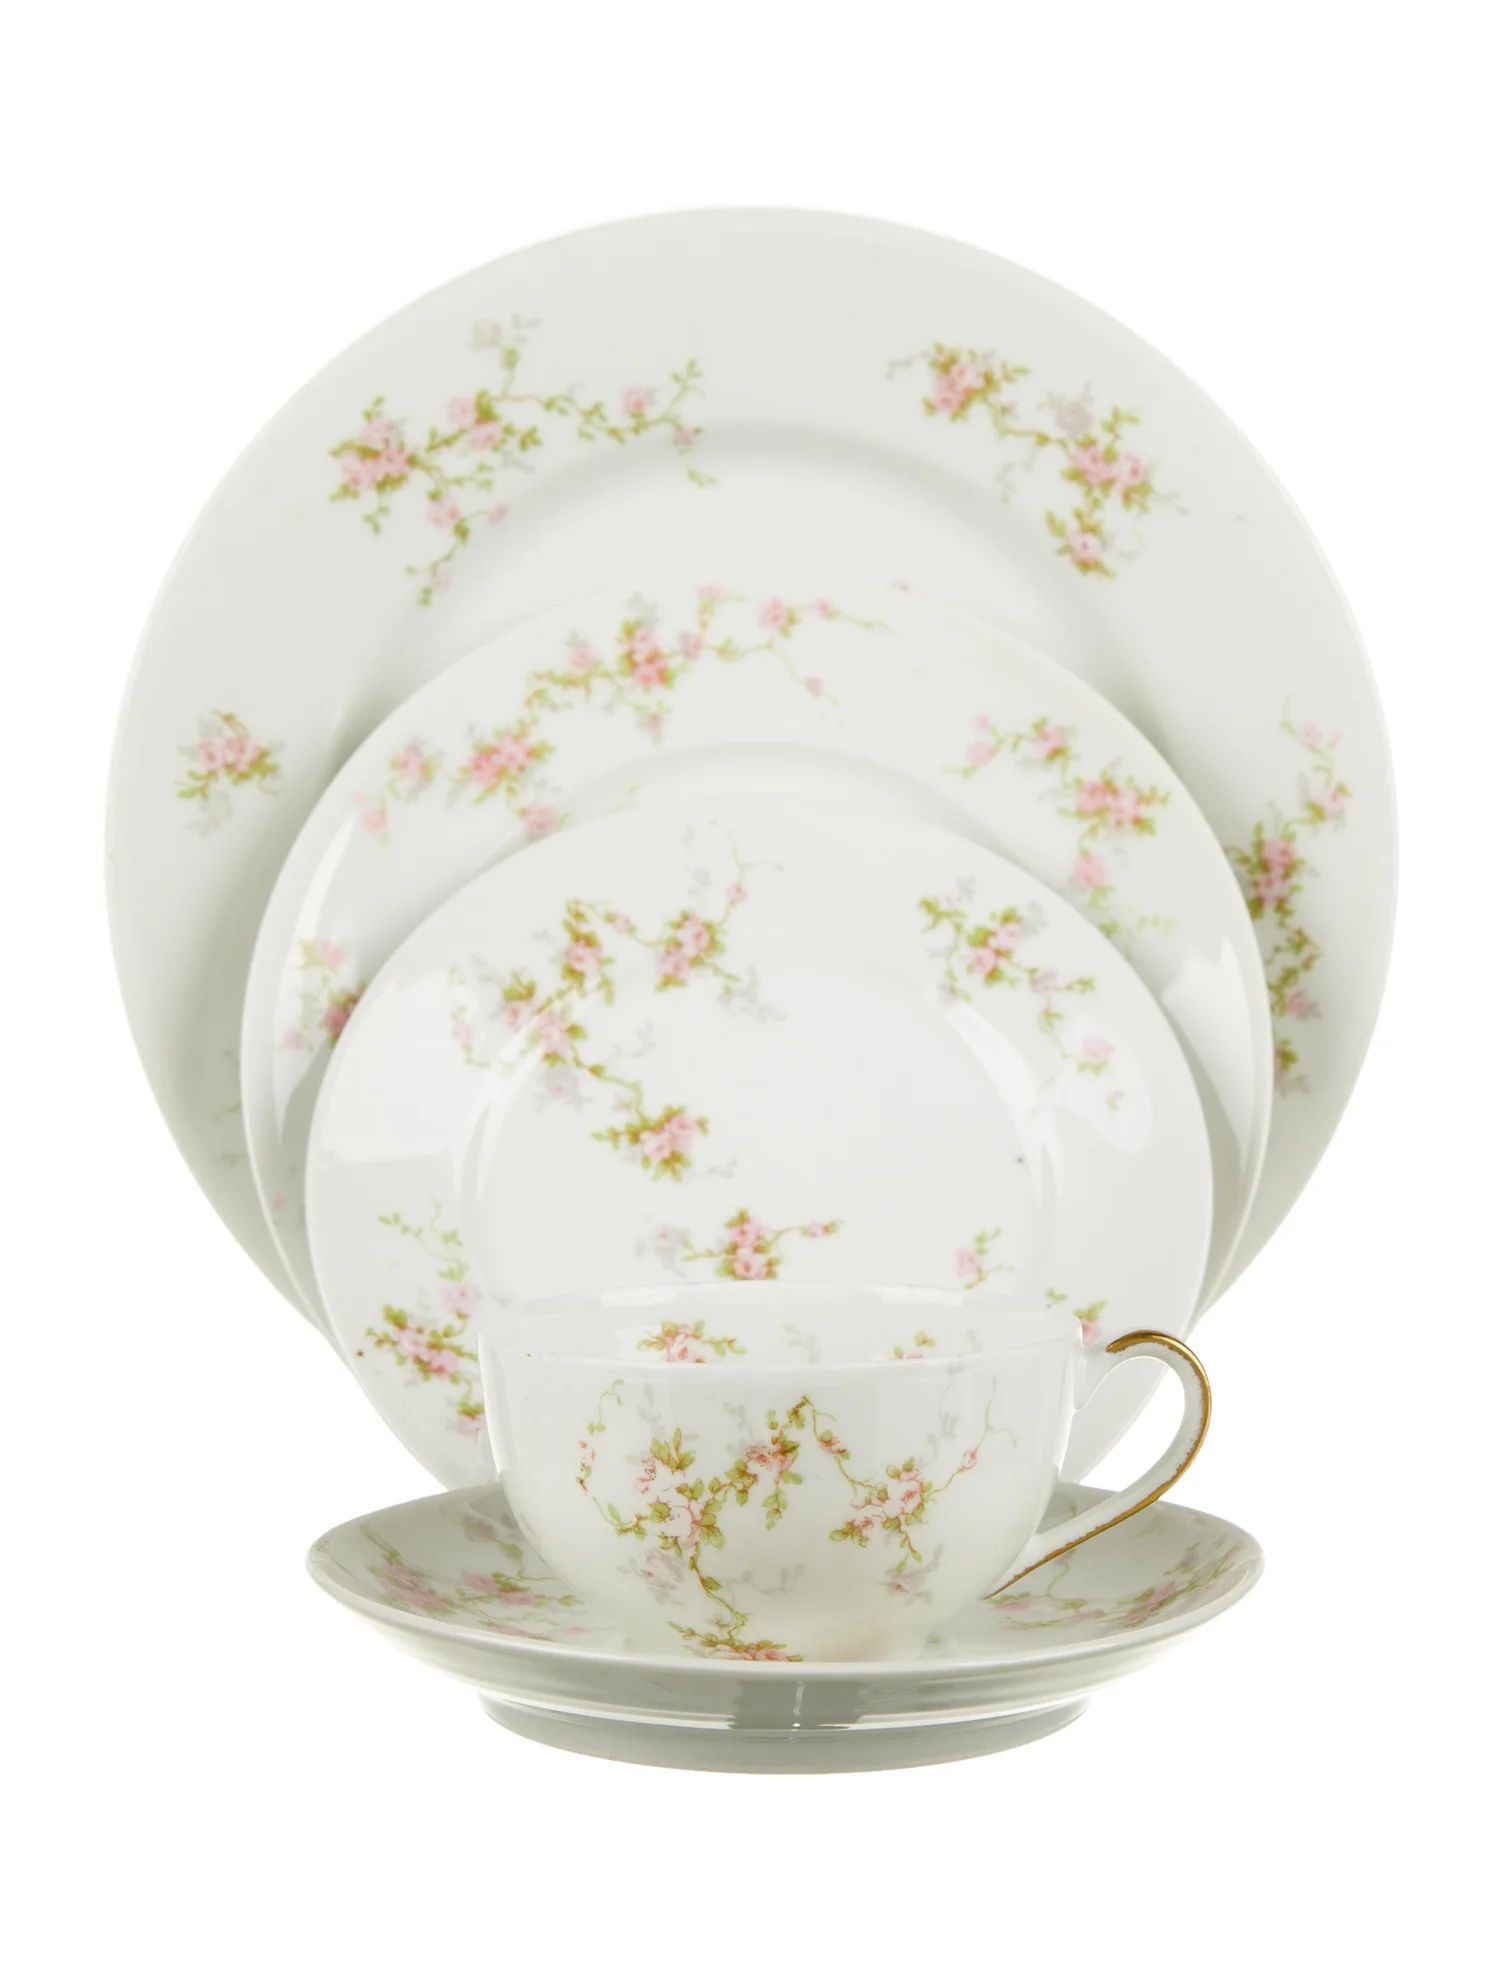 62-Piece Lucille Dinner Service | The RealReal